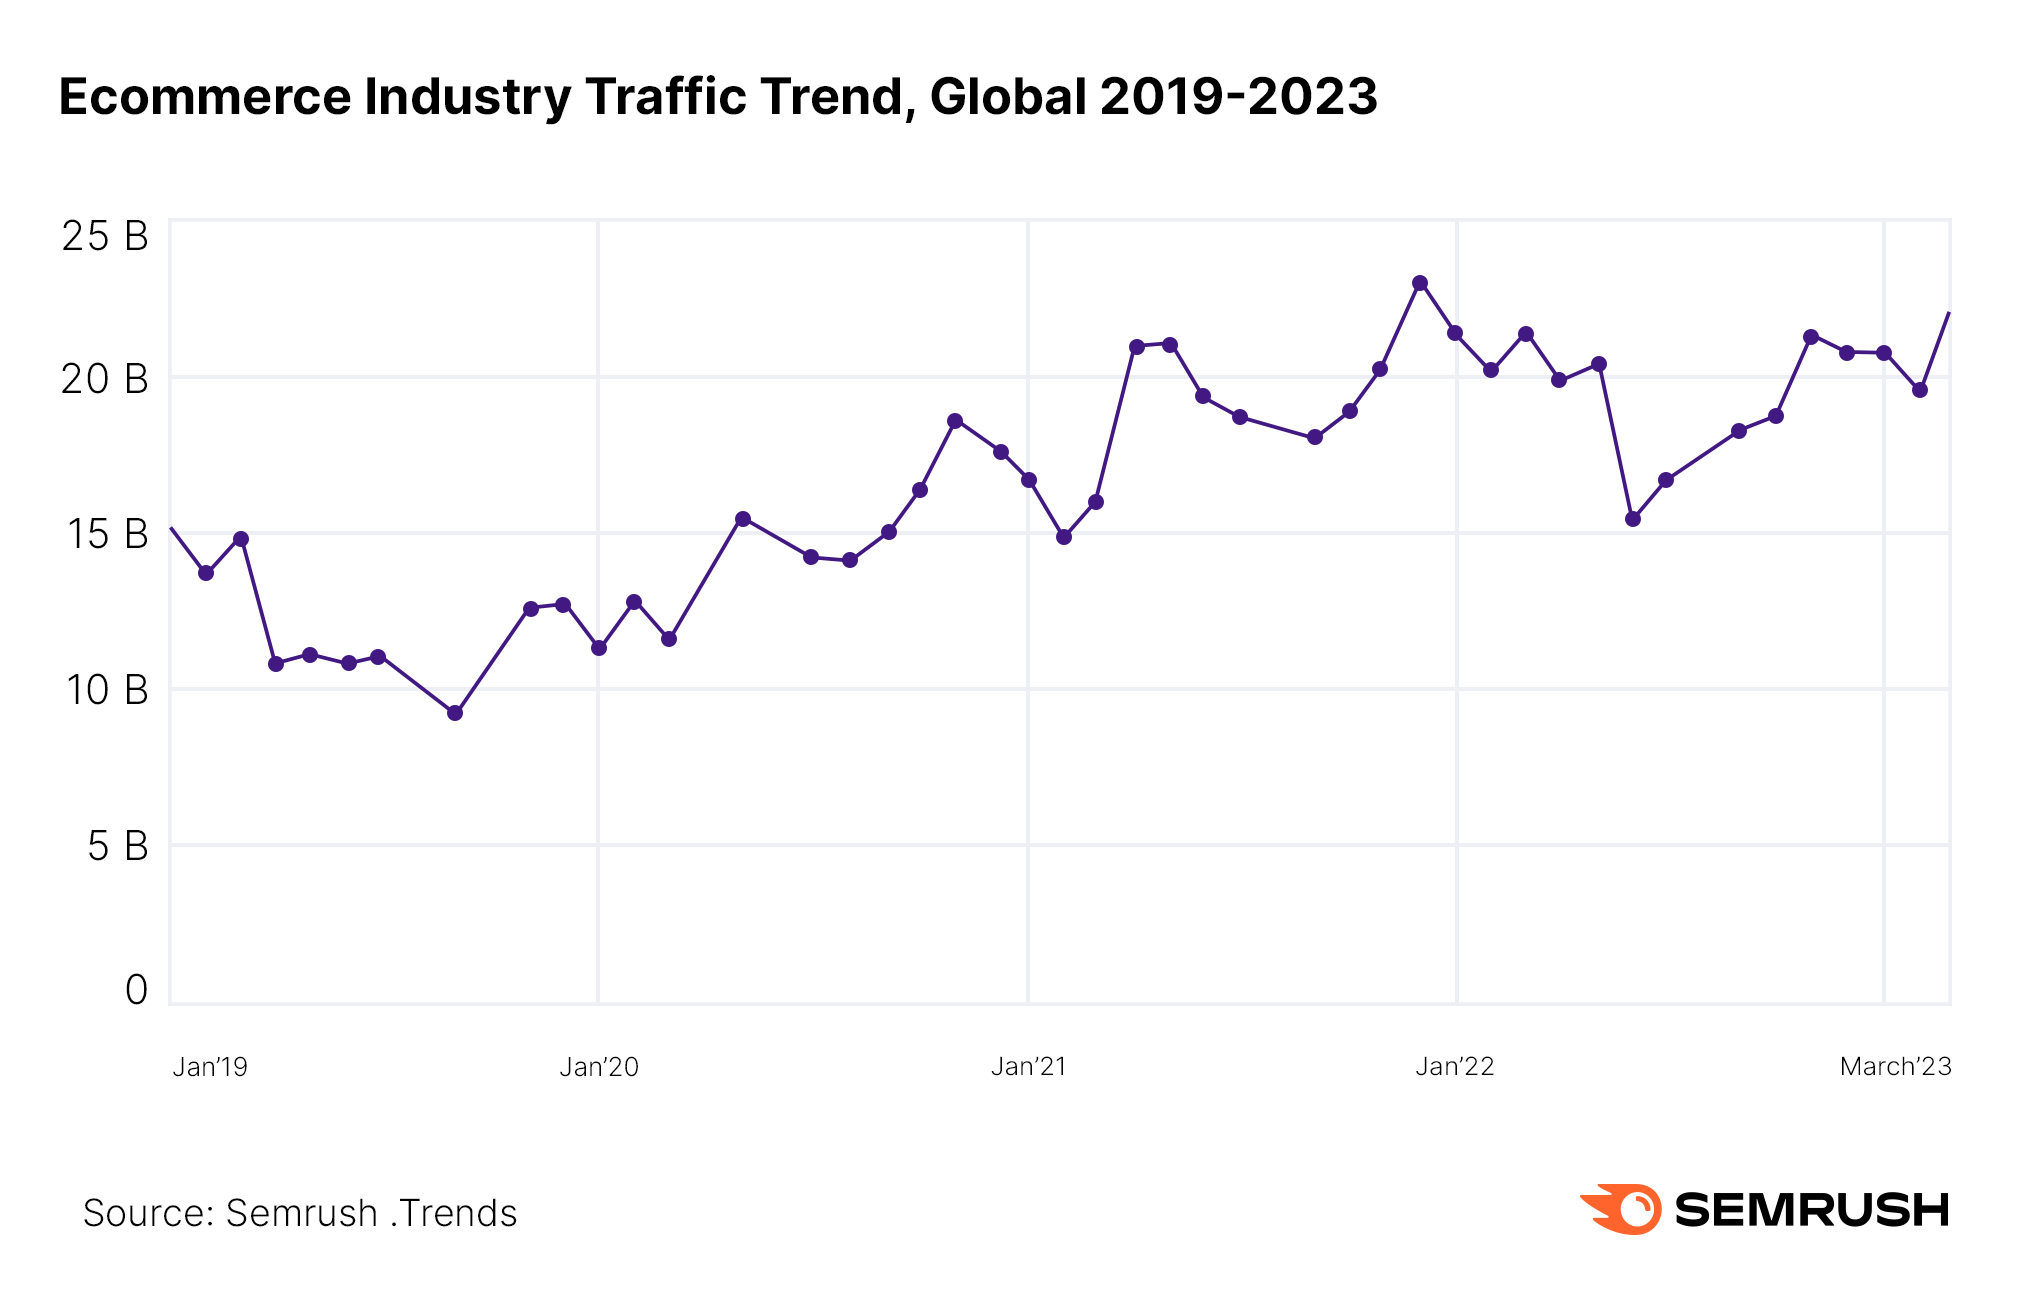 Ecommerce Industry Traffic Trend, Global 2019 - 2023